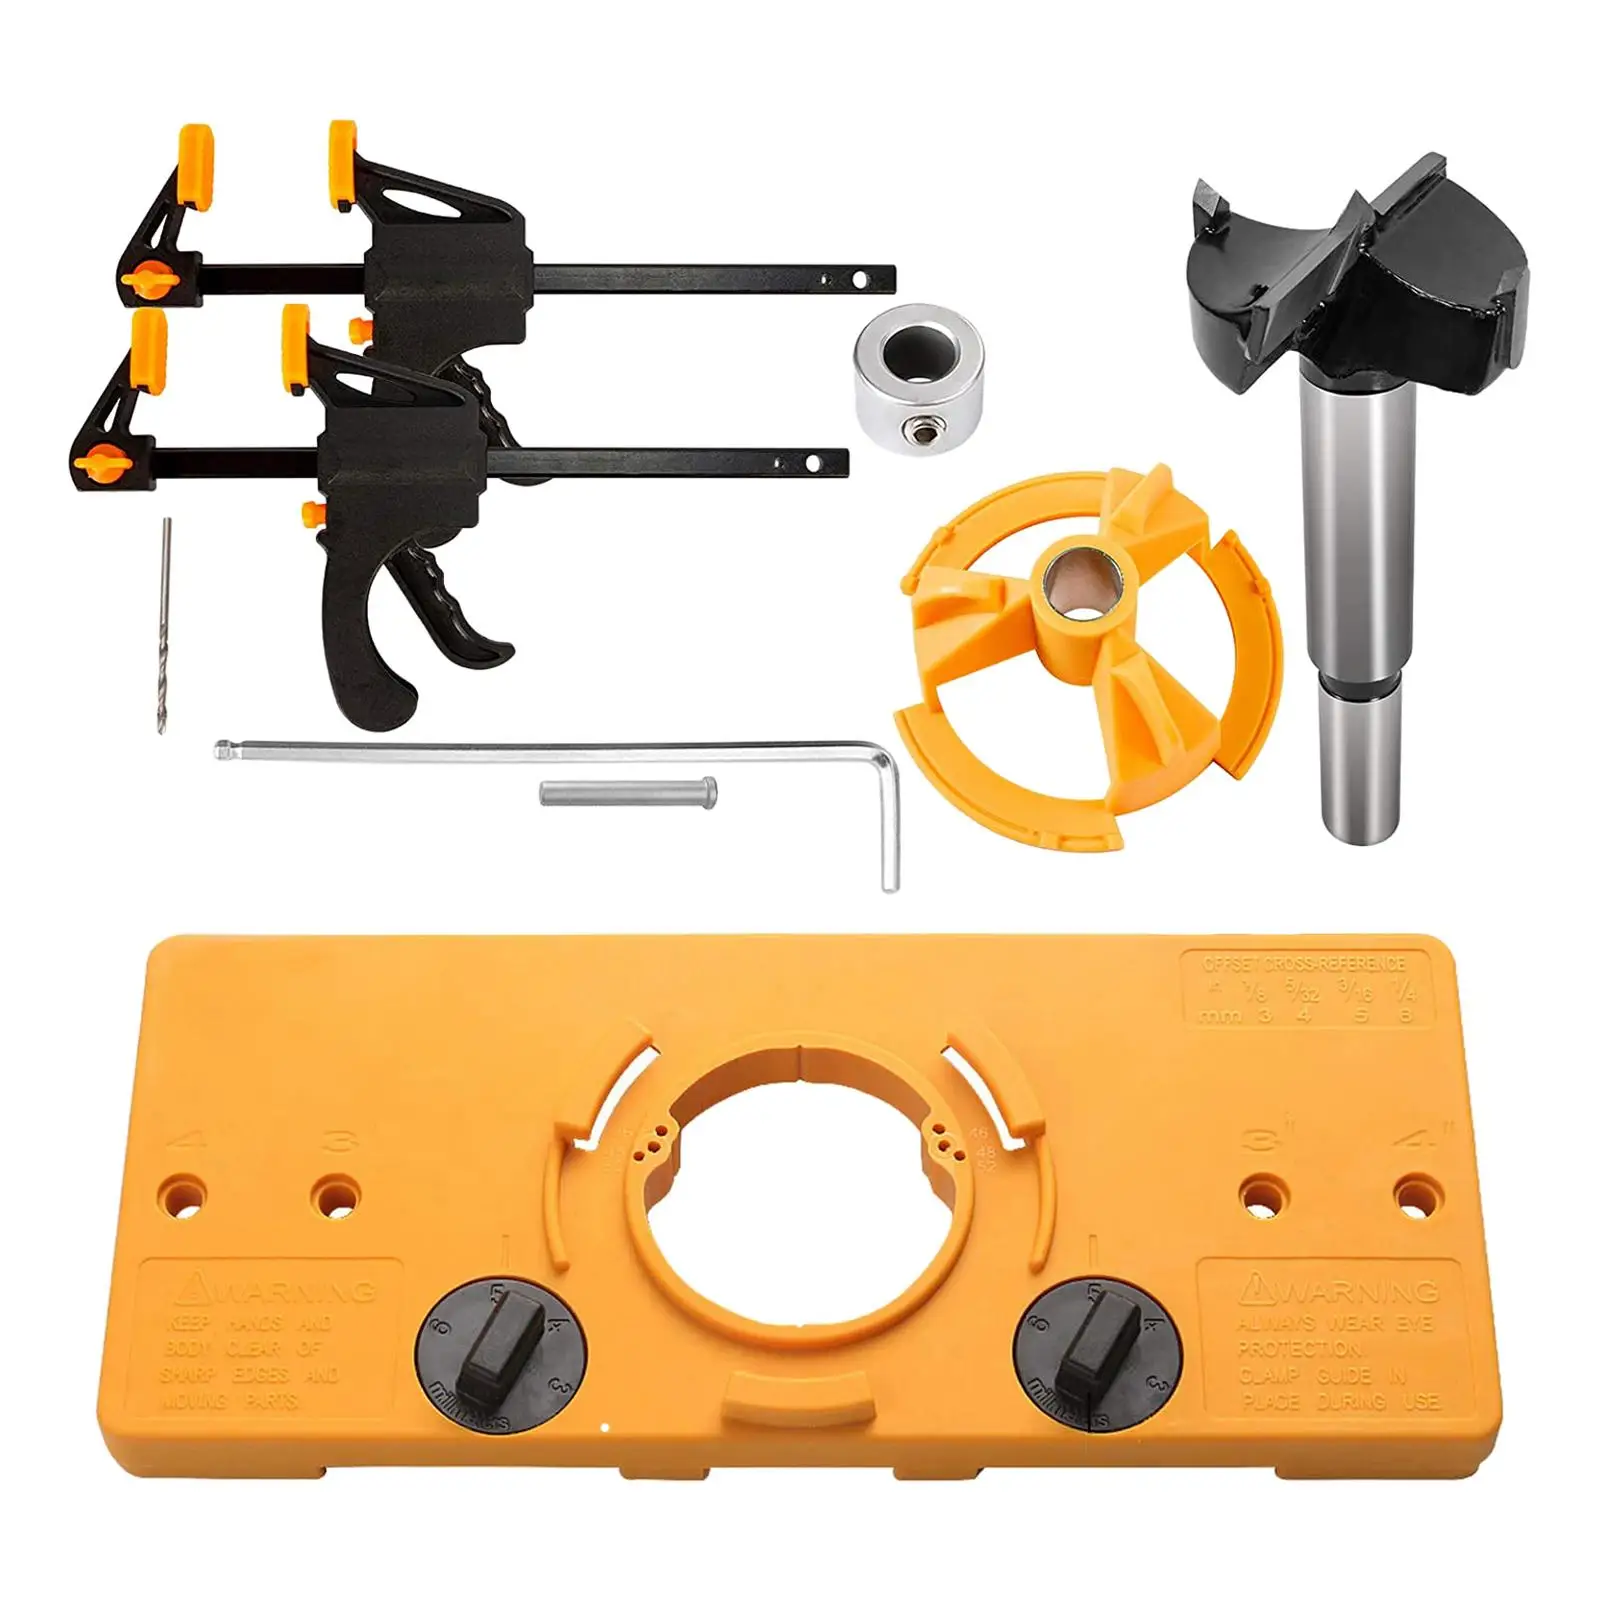 35mm Hinge Hole Drilling   Locator Open Hole Positioner for Furniture